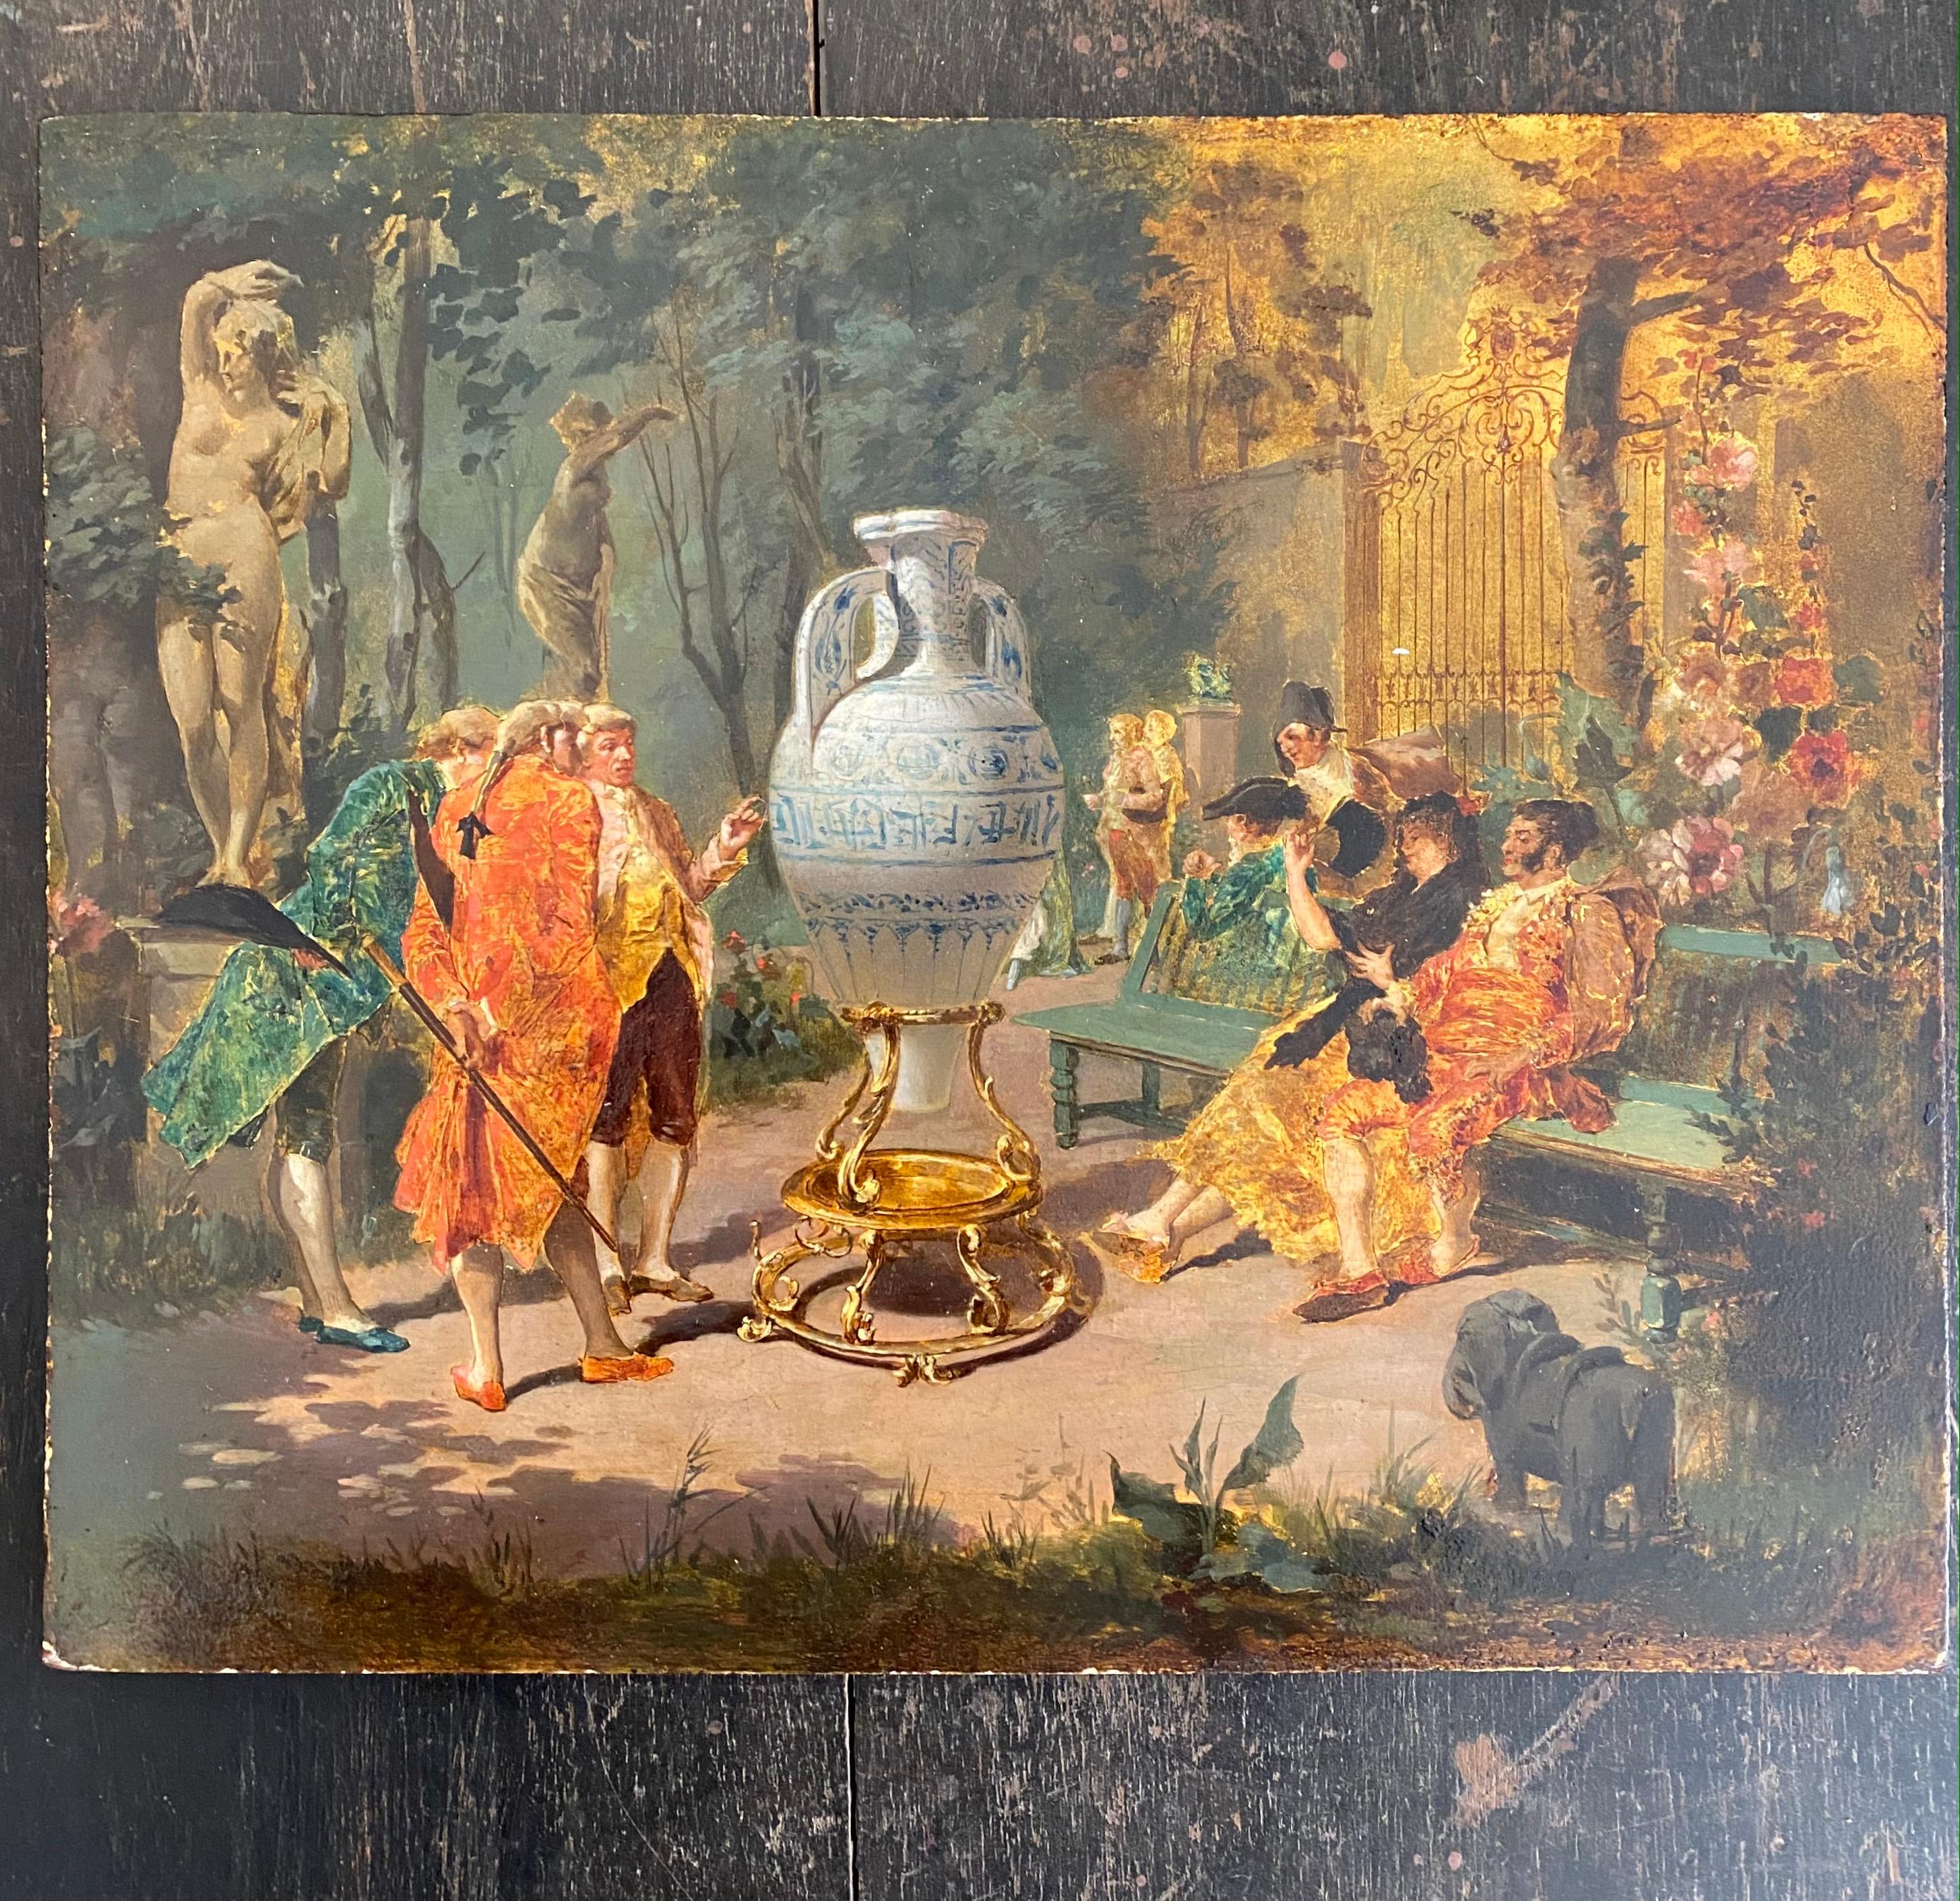 Eugène Millet exhibited at the Paris Salon, from 1866, genre scenes and still lifes. He is probably the artist from whom the Vieillard factory asked for the splendid models of the service of the large birds. Our historical scene, painted with